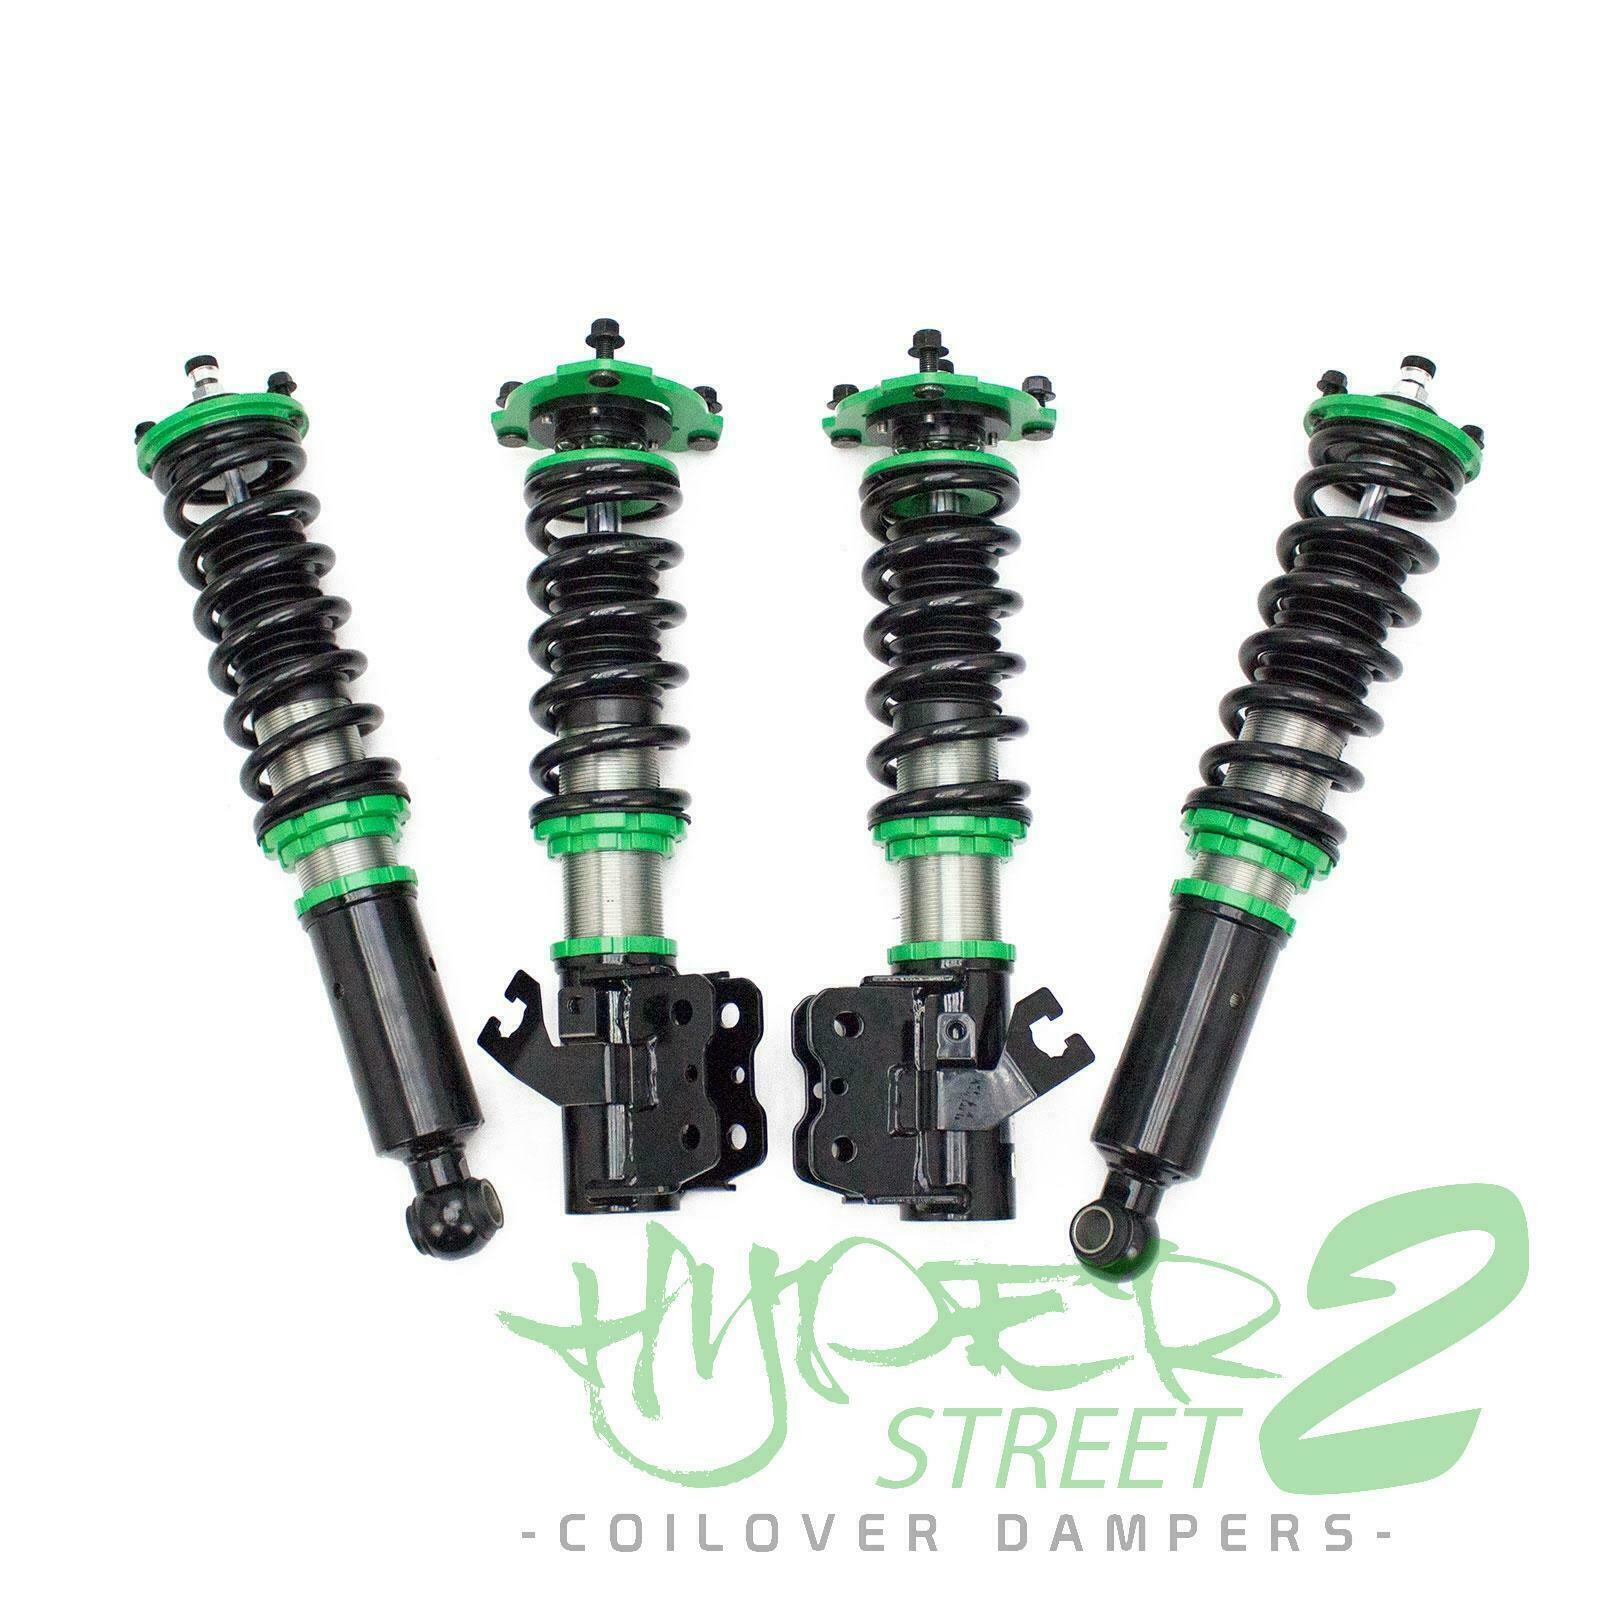 Rev9 Power Hyper Street Coilovers Lowering Suspension Silvia 240sx S13 89-94 New